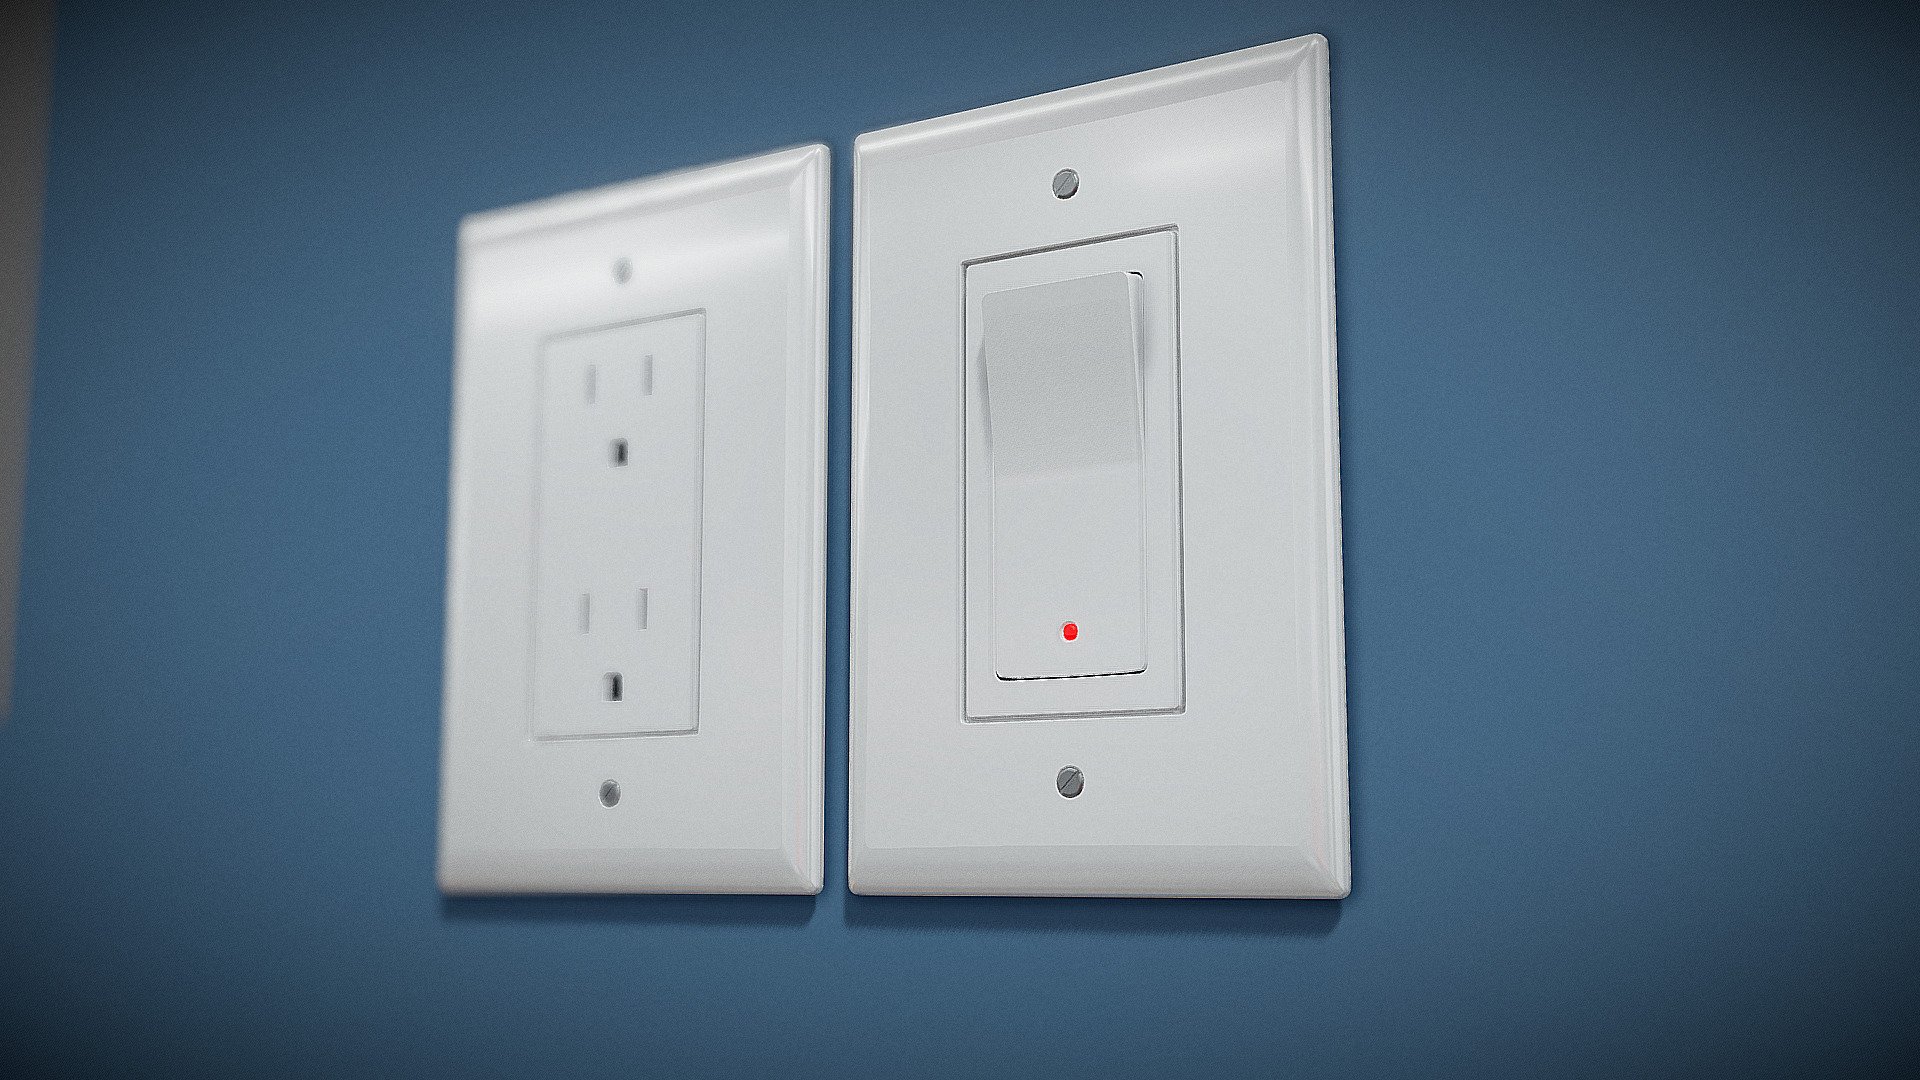 Switch &amp; electric outlet
Modeled in Lightwave 3d 2015
Mid poly, enough detail, no textures, just separated materials 3d model